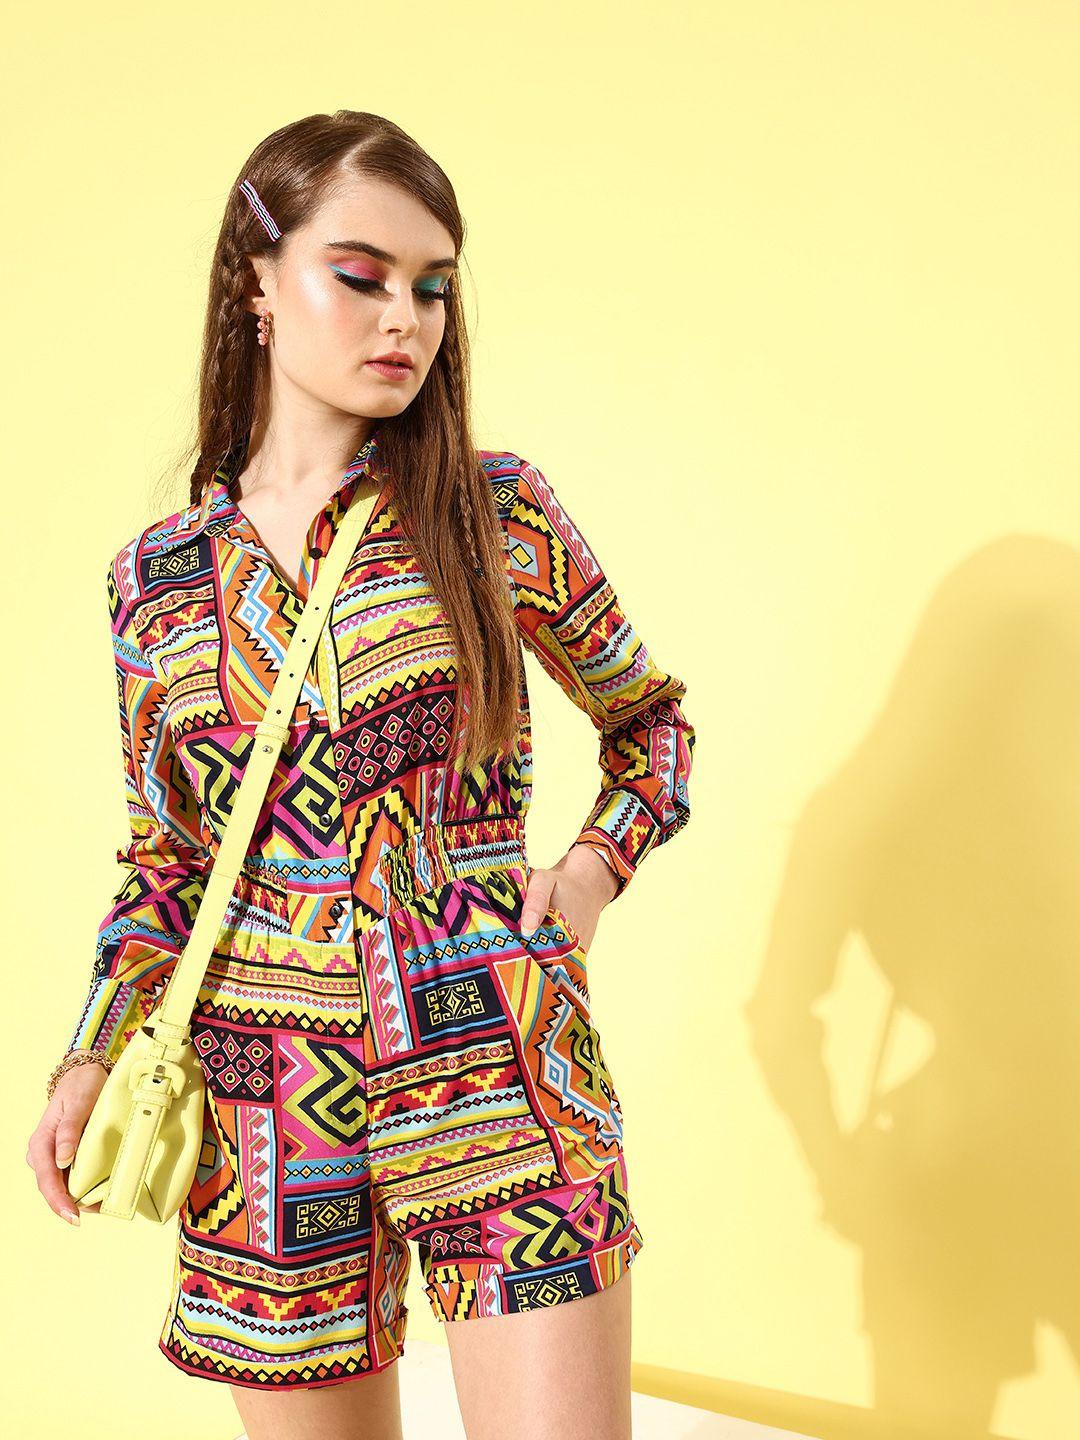 style quotient women bright yellow printed playsuit